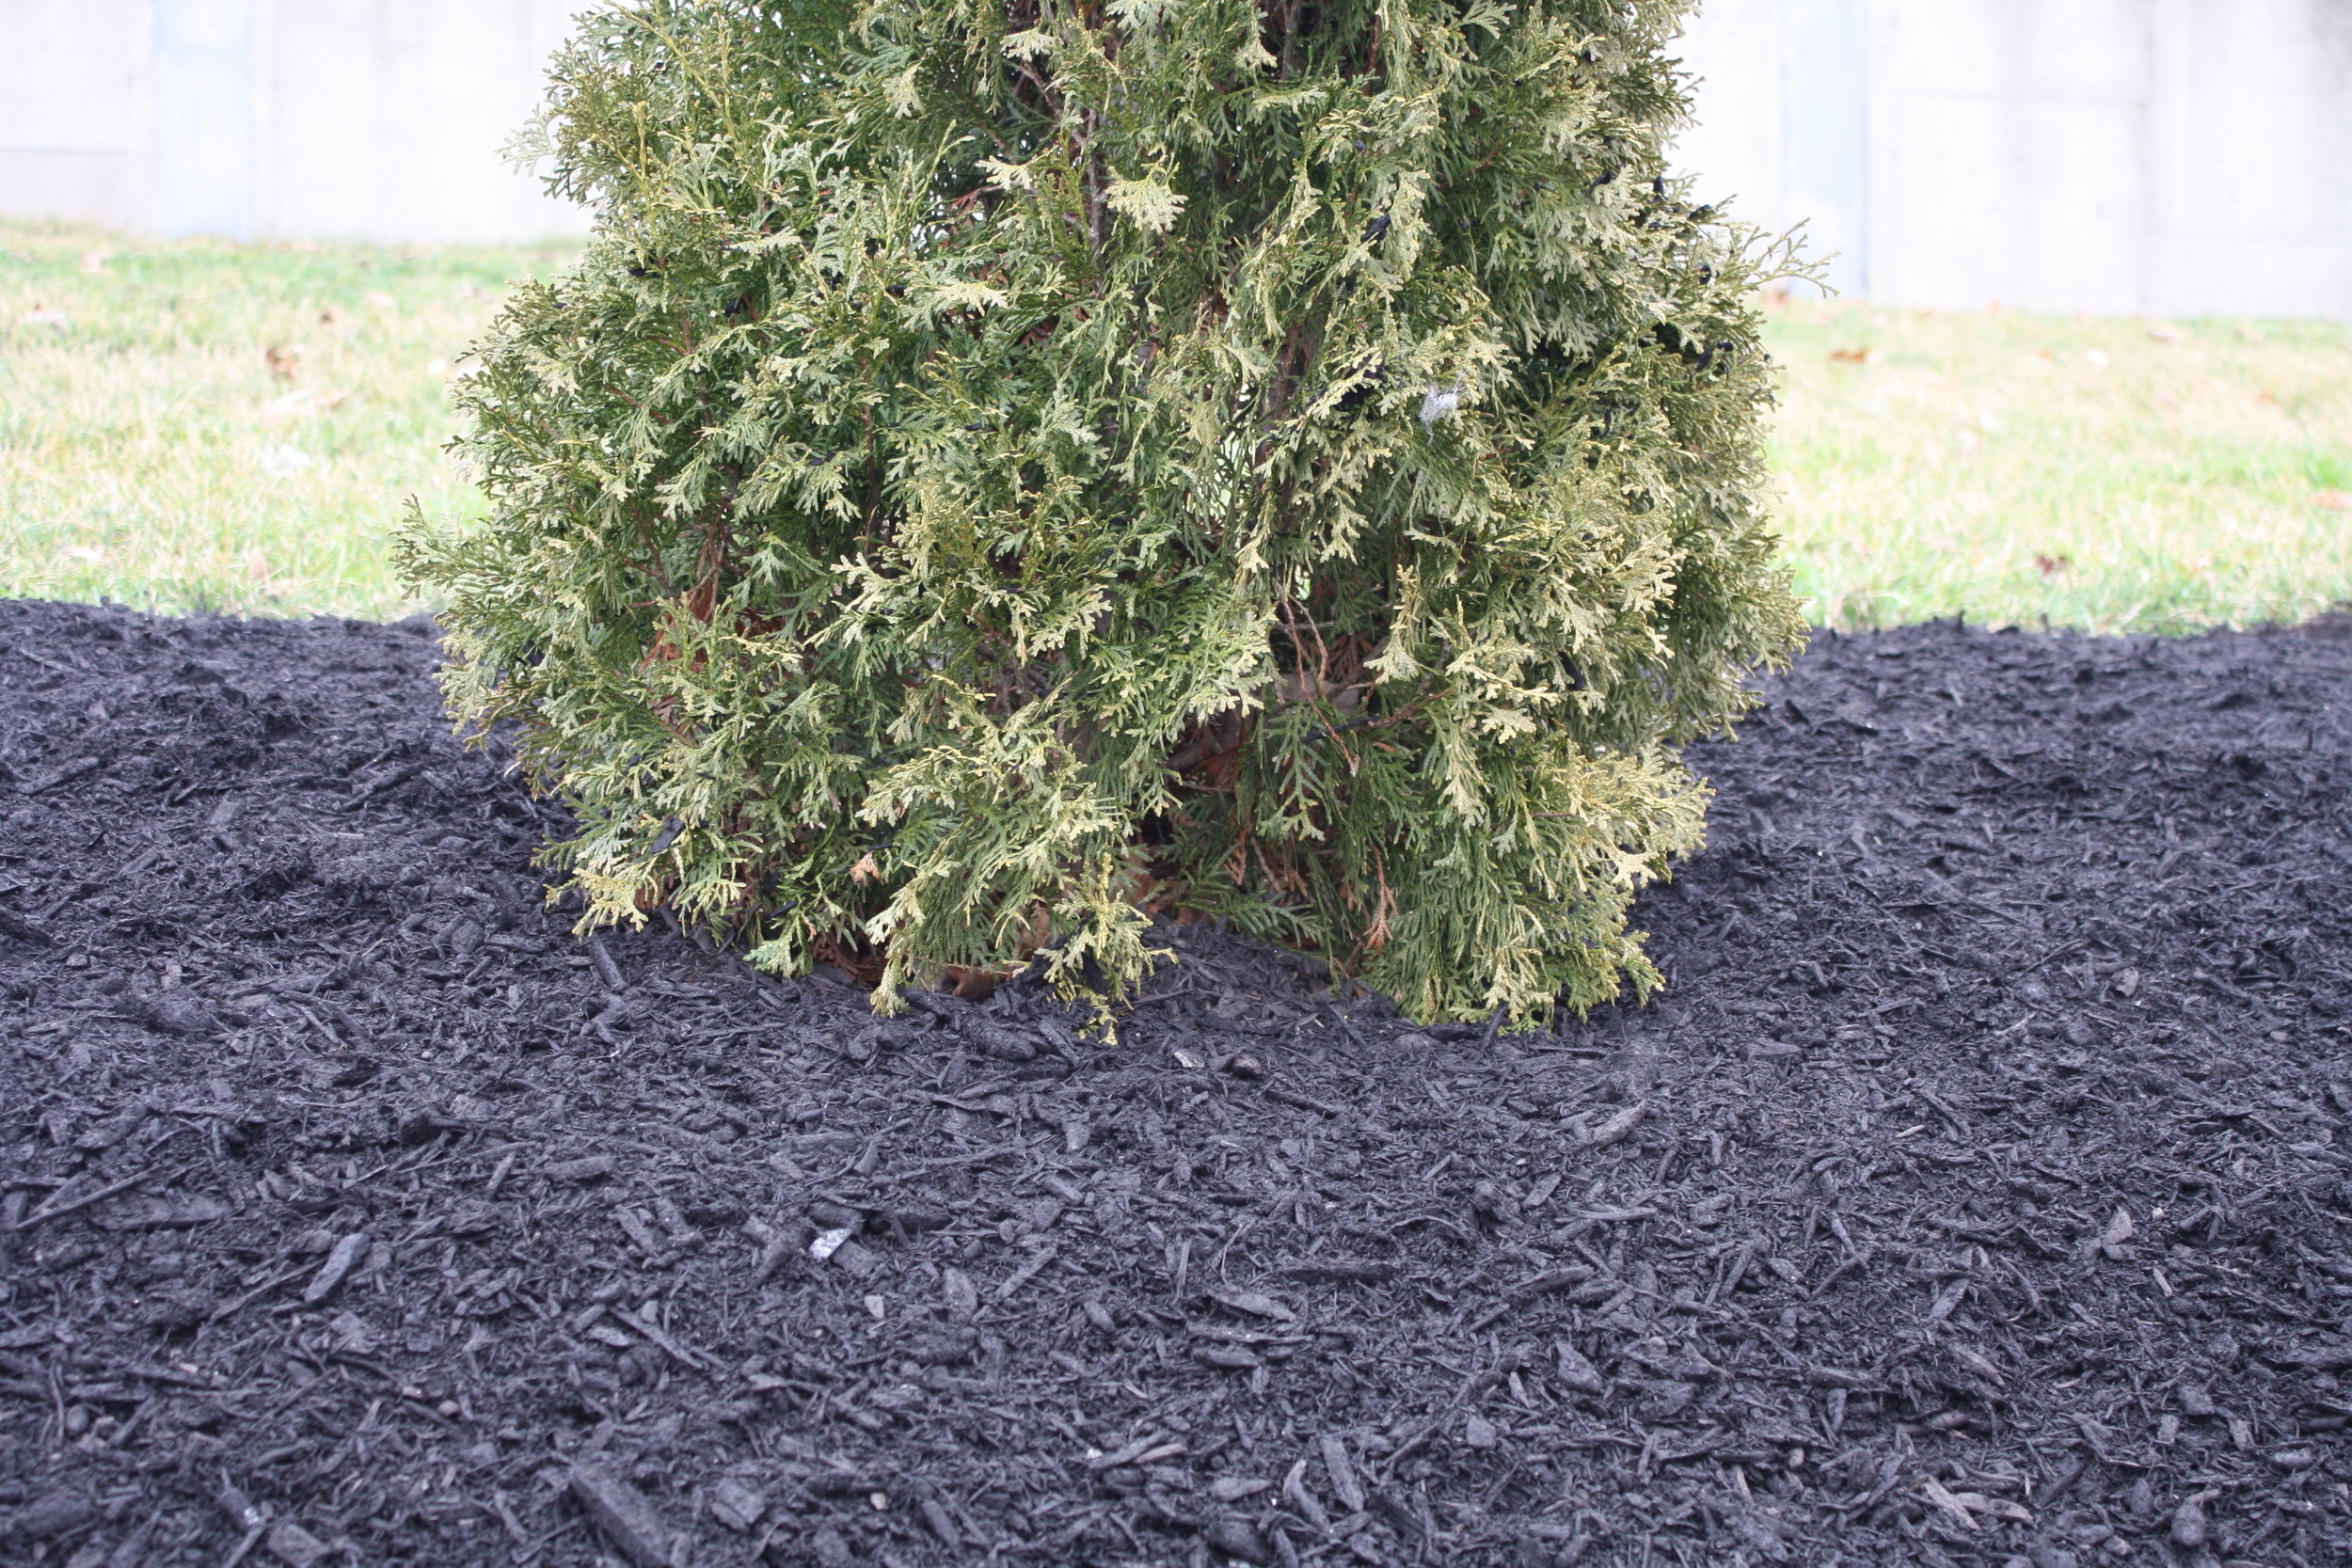 The black mulch dye from @petramax is amazing! I highly recommend